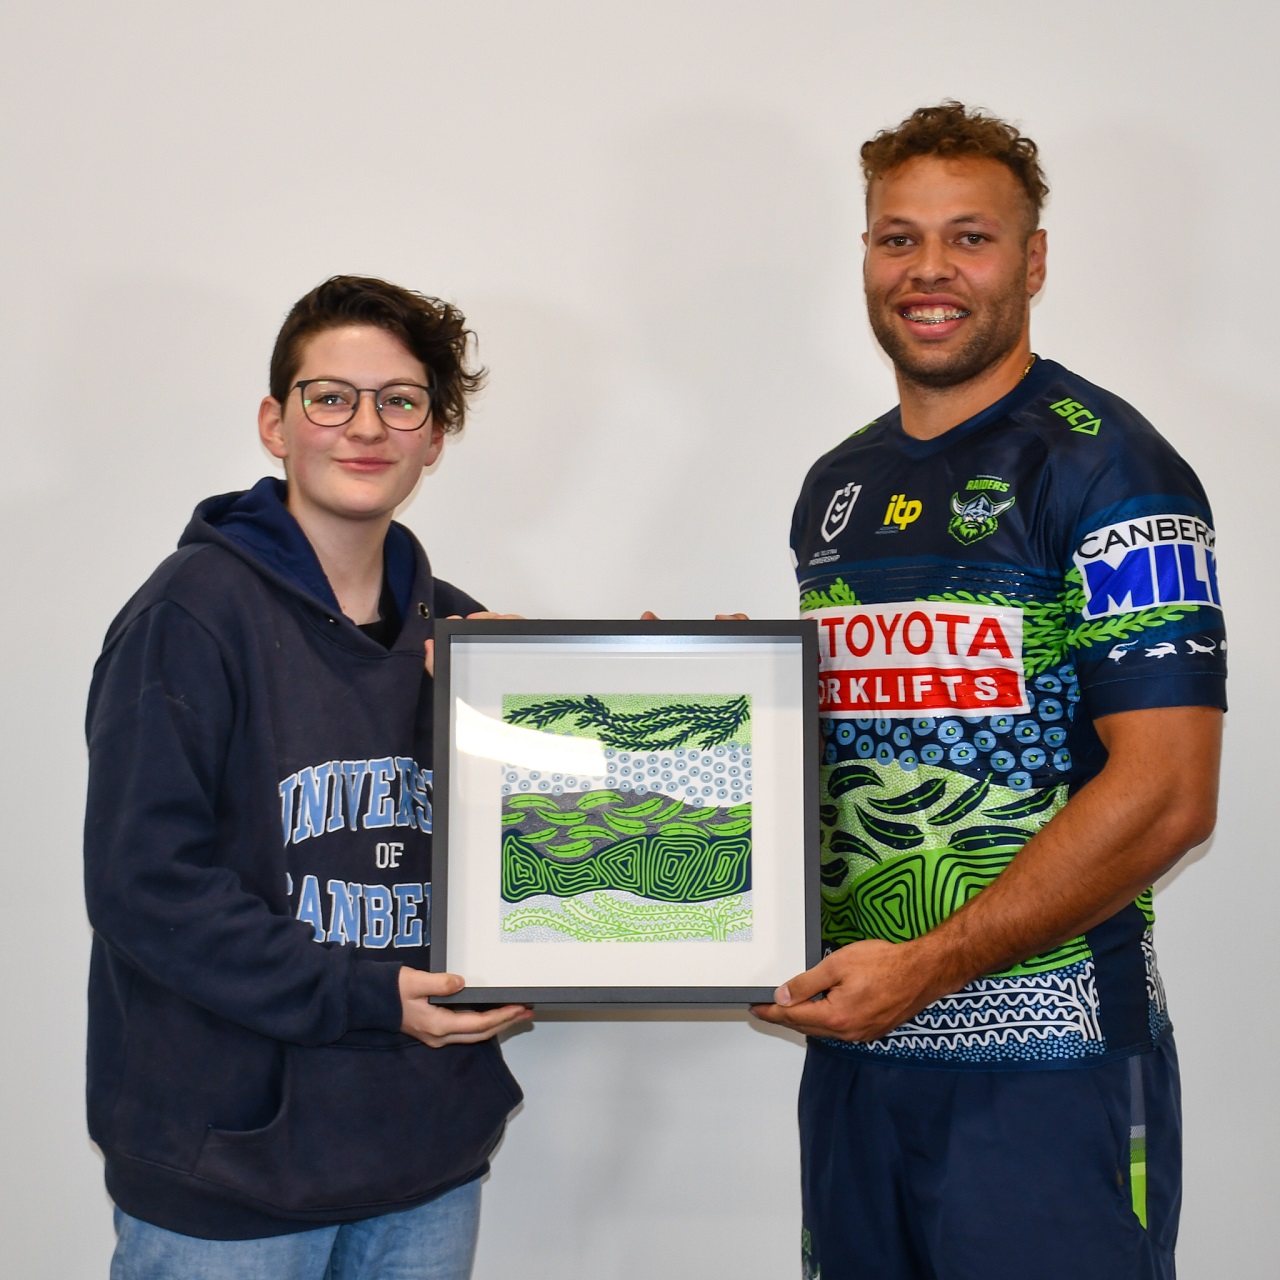 Enduring Connections' - Raiders 2022 Indigenous Jersey